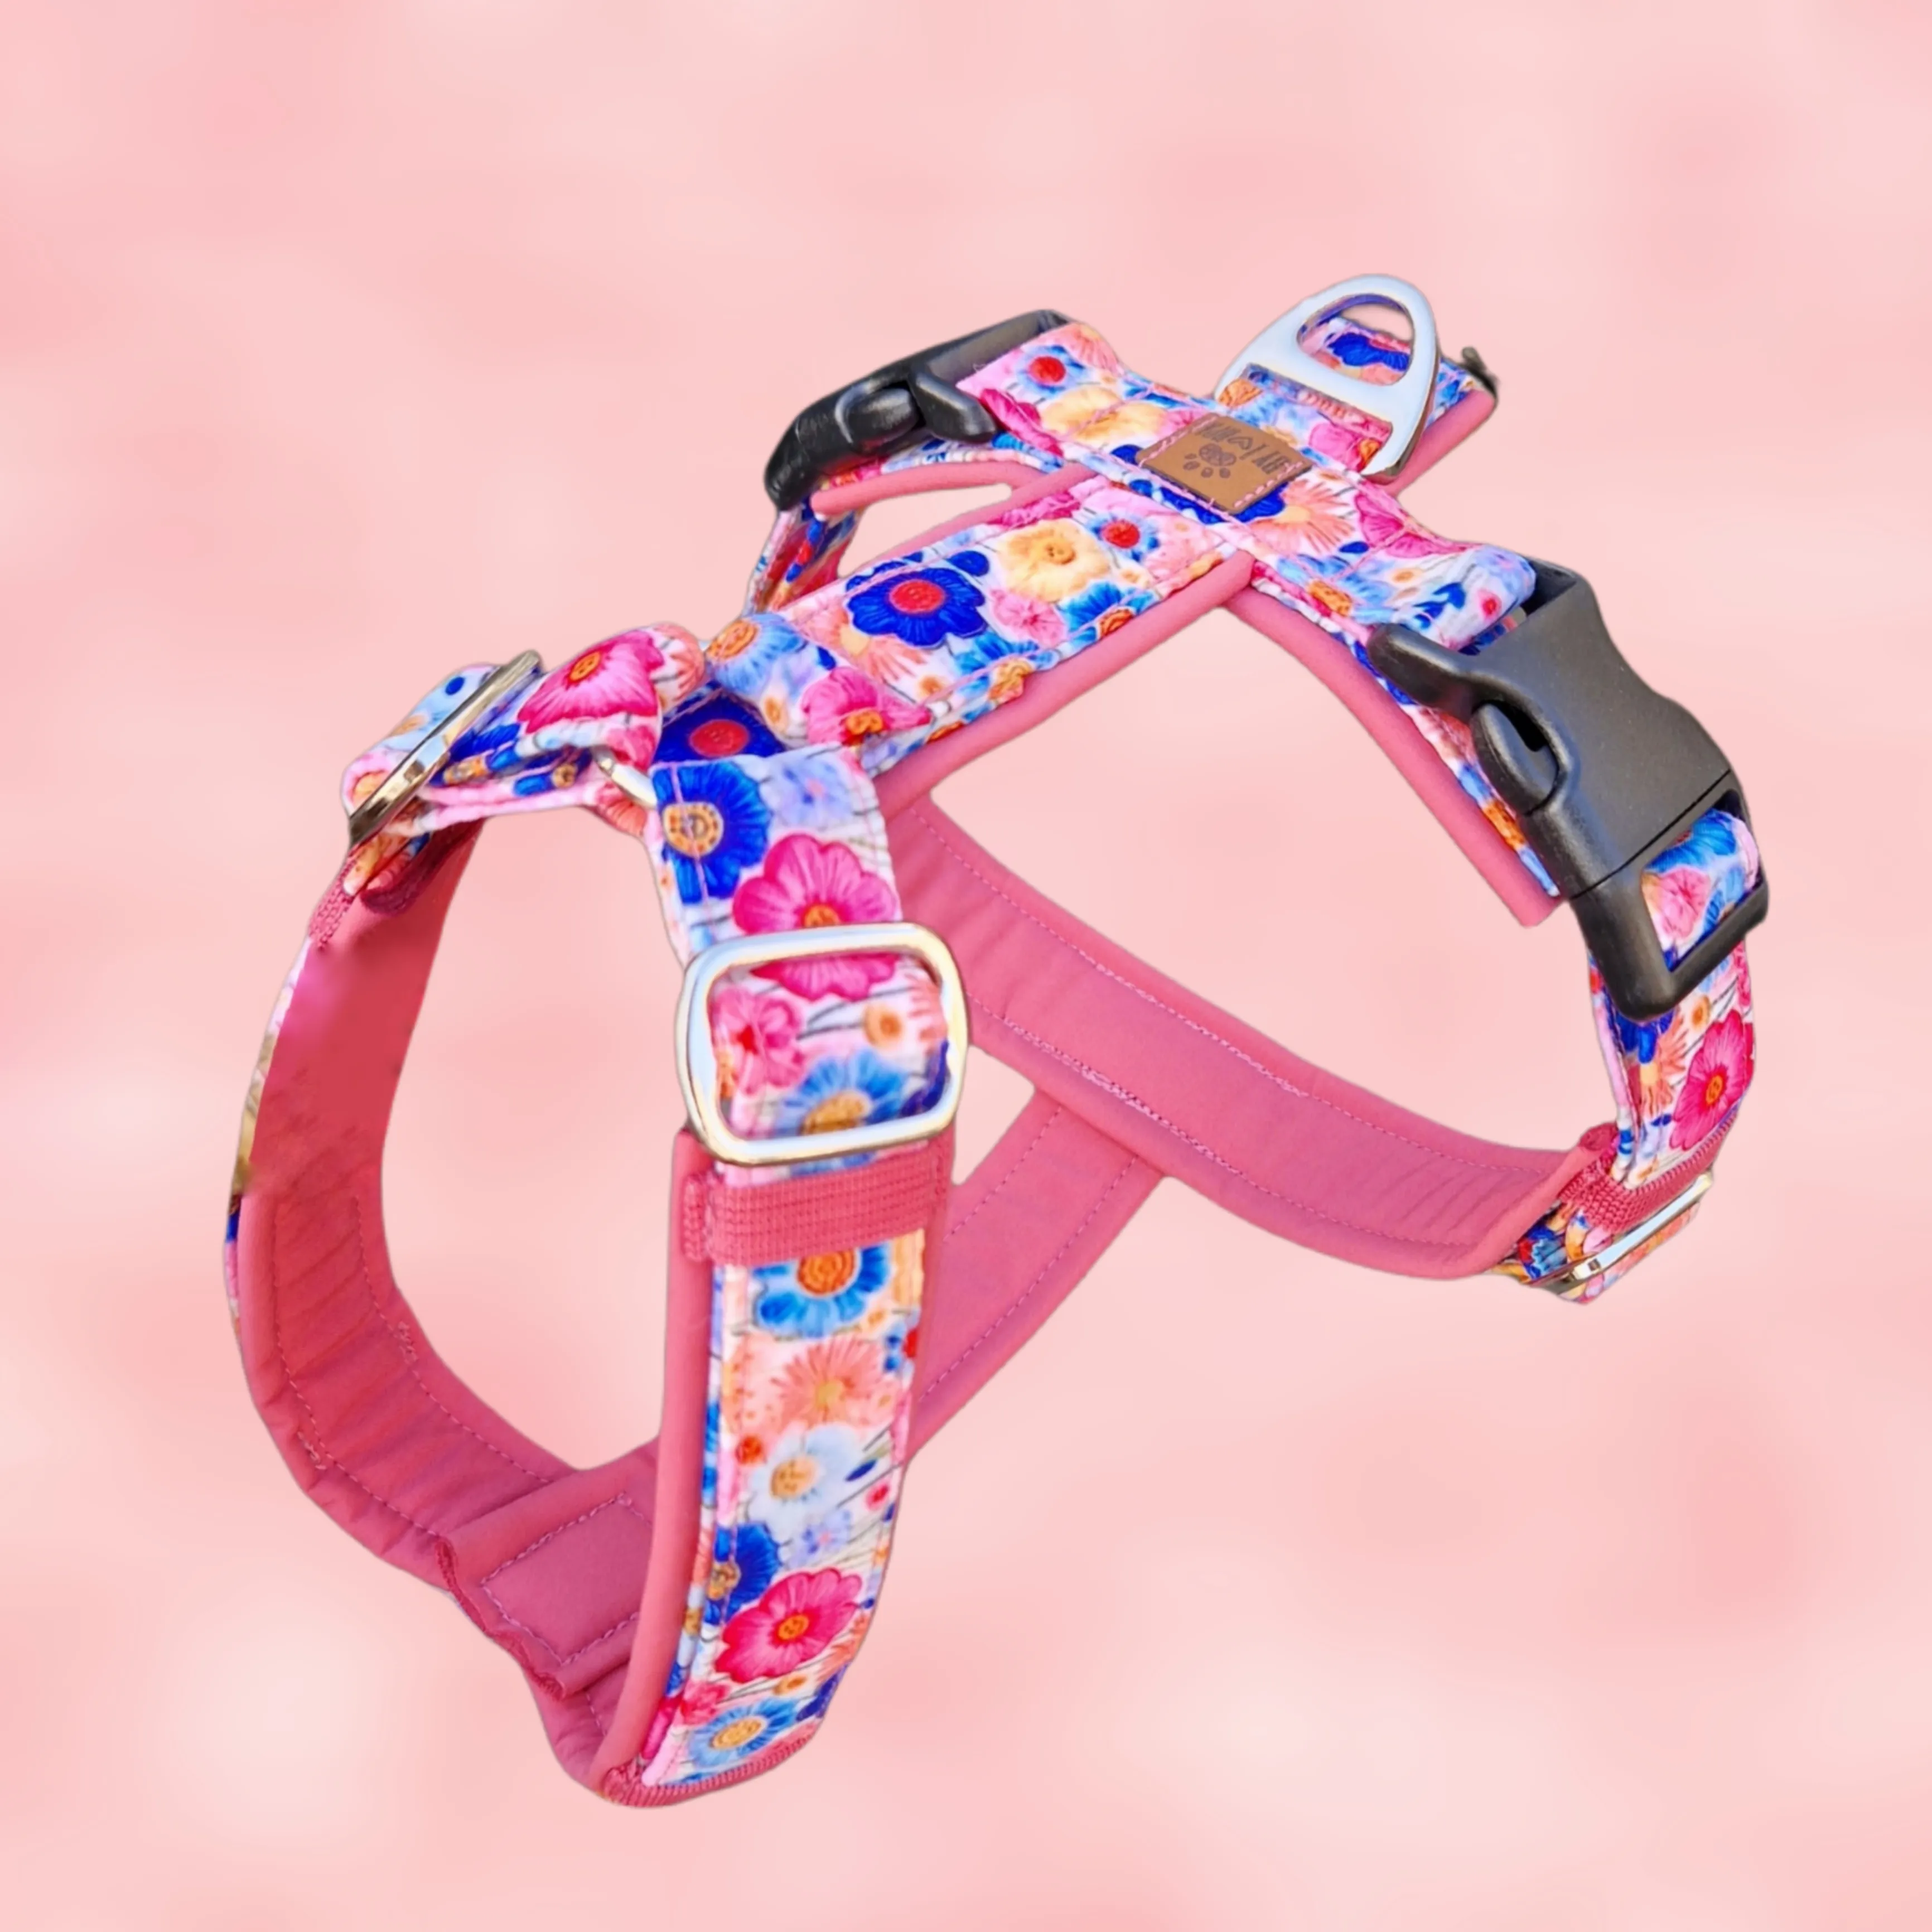 Handmade harness made of fabric with floral print